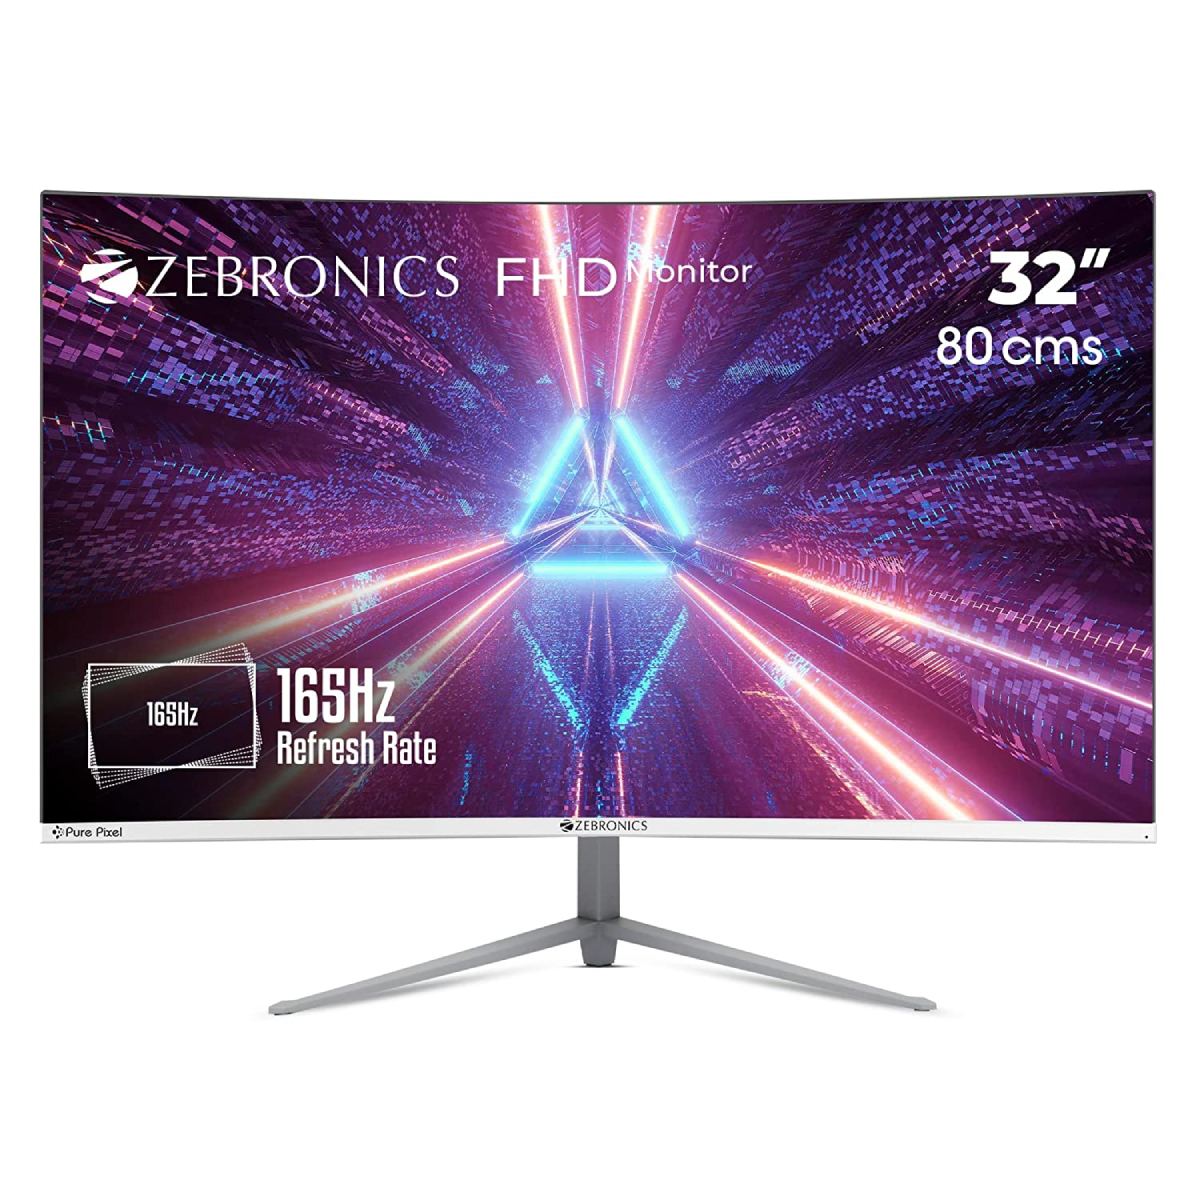 Zebronics ZEB-AC32FHD Curved Slim Gaming LED Monitor with 80cm (32”) Wide  Screen, Full HD 1920x1080, 165Hz Refresh Rate, Display Port, HDMI, 300cd/m²  Bright, USB, Built in Speaker and Wall mountable Hungamastart